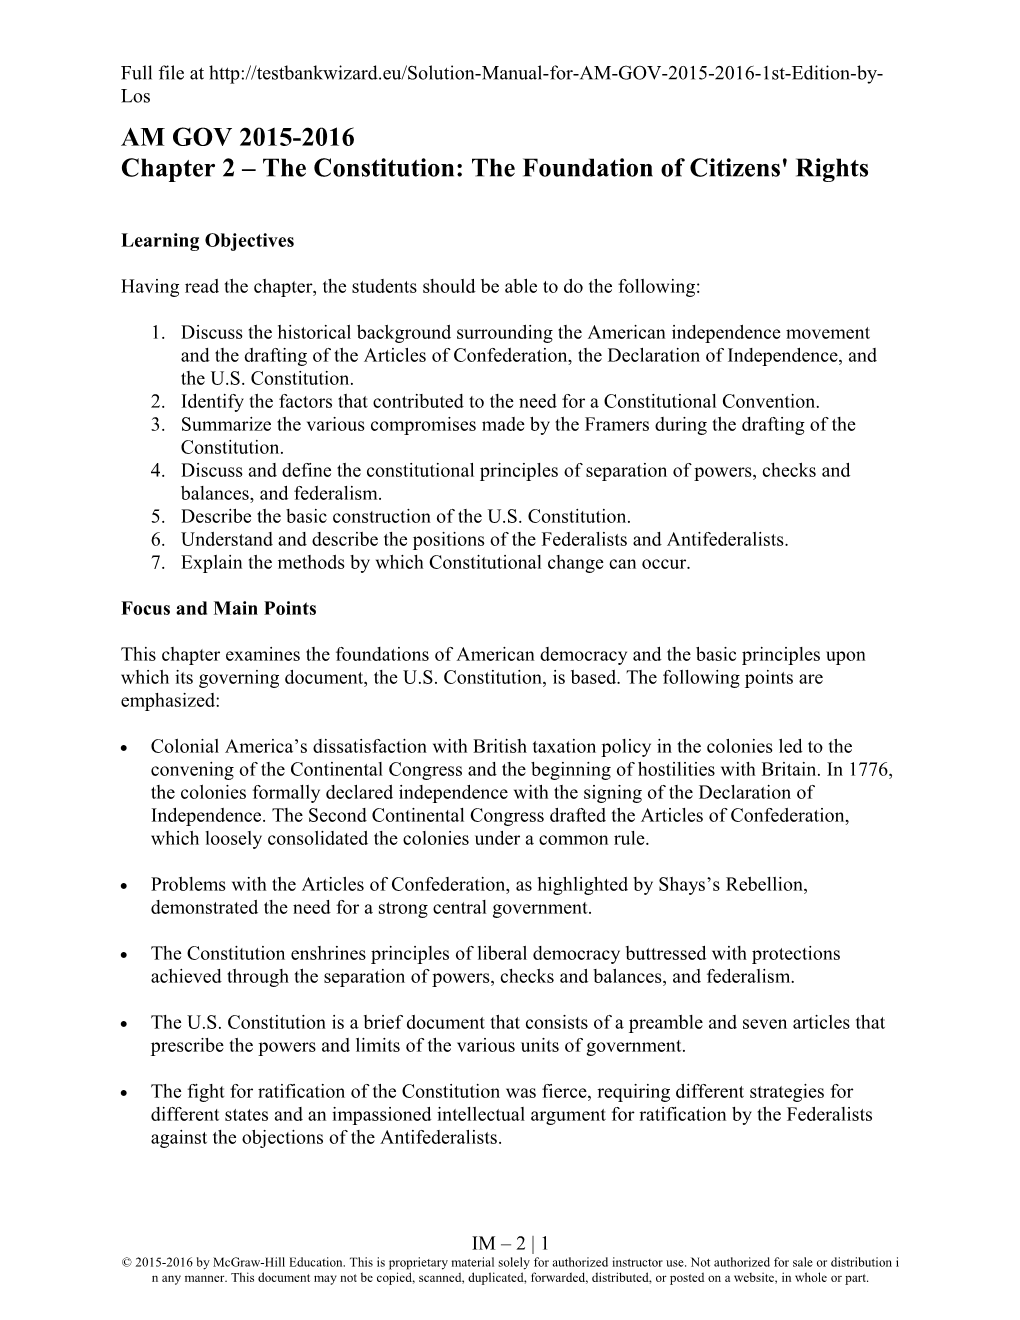 Chapter 2 the Constitution: the Foundation of Citizens' Rights